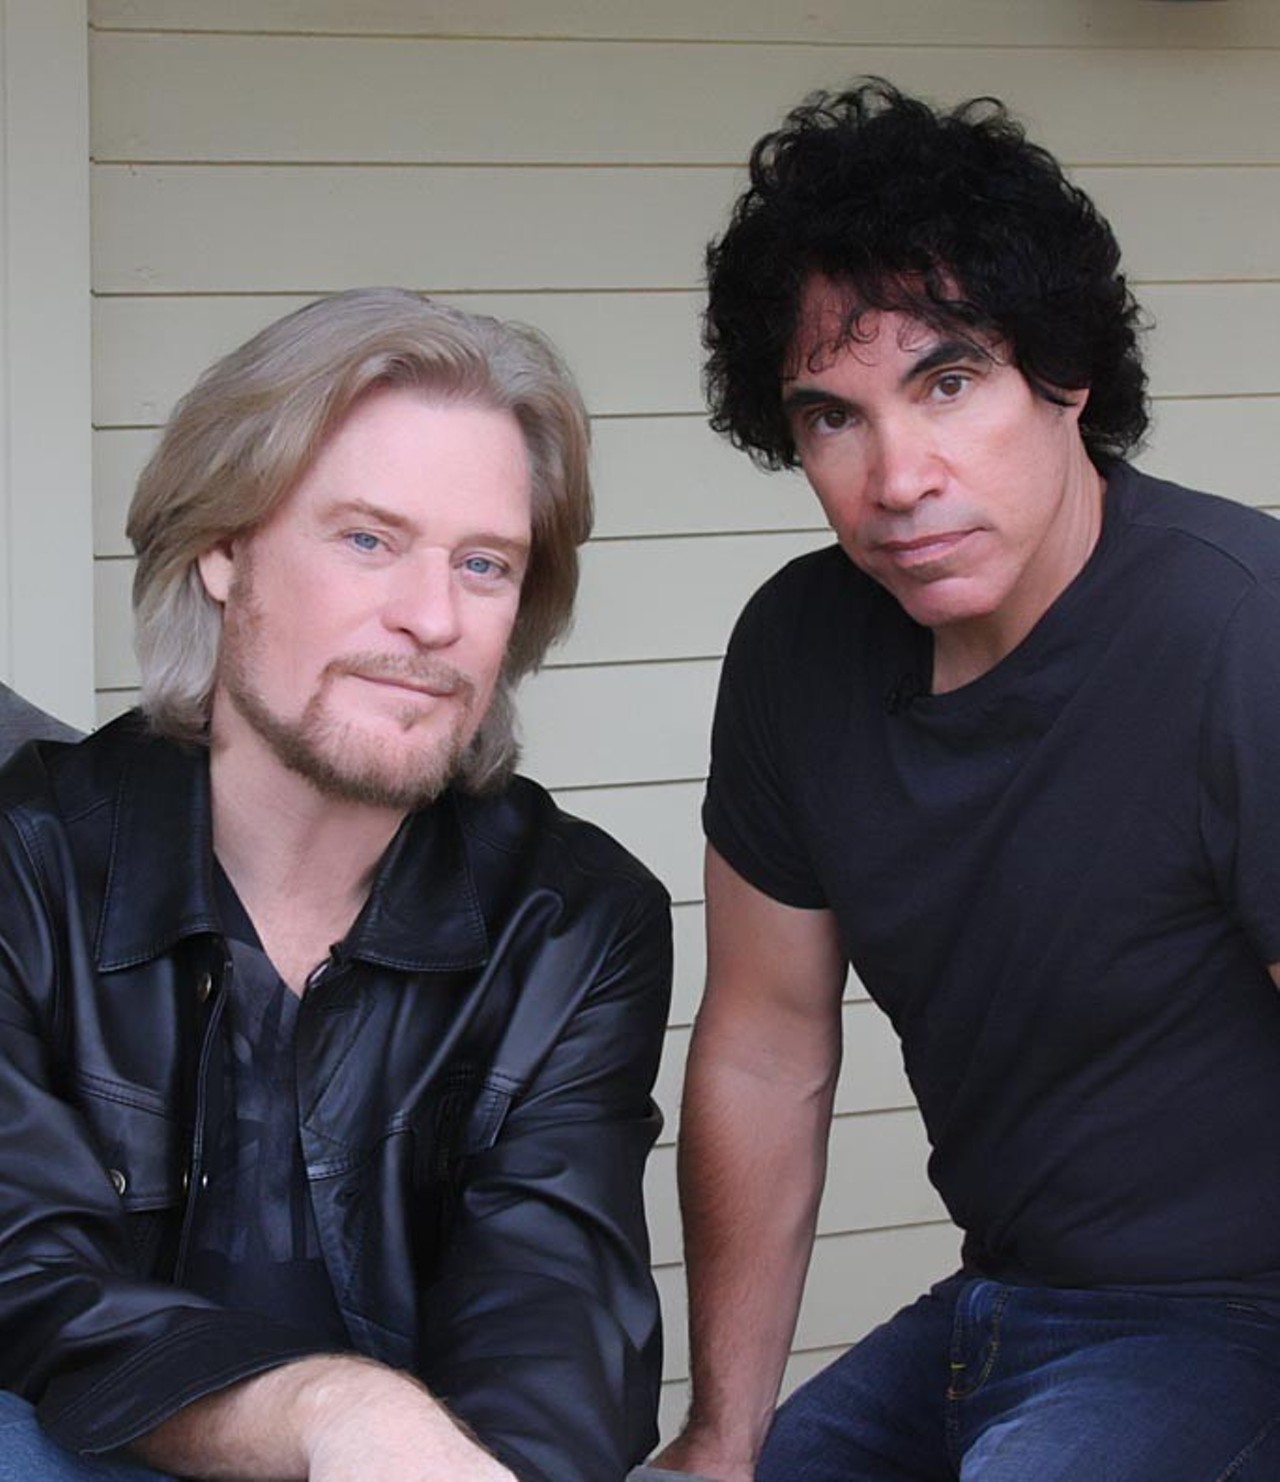 Daryl Hall & John Oates 
Little Caesars Arena, May 20, 7 p.m., $49.50+
Calling all rich girls and maneaters &#151; the soulful Philly twosome are on their way to Detroit to make our (concert) dreams come true. Now billed as Daryl Hall & John Oates, the duo are sure to perform their classics which topped the pop charts in the &#145;80s.
Photo by Gary Harris, Flickr.